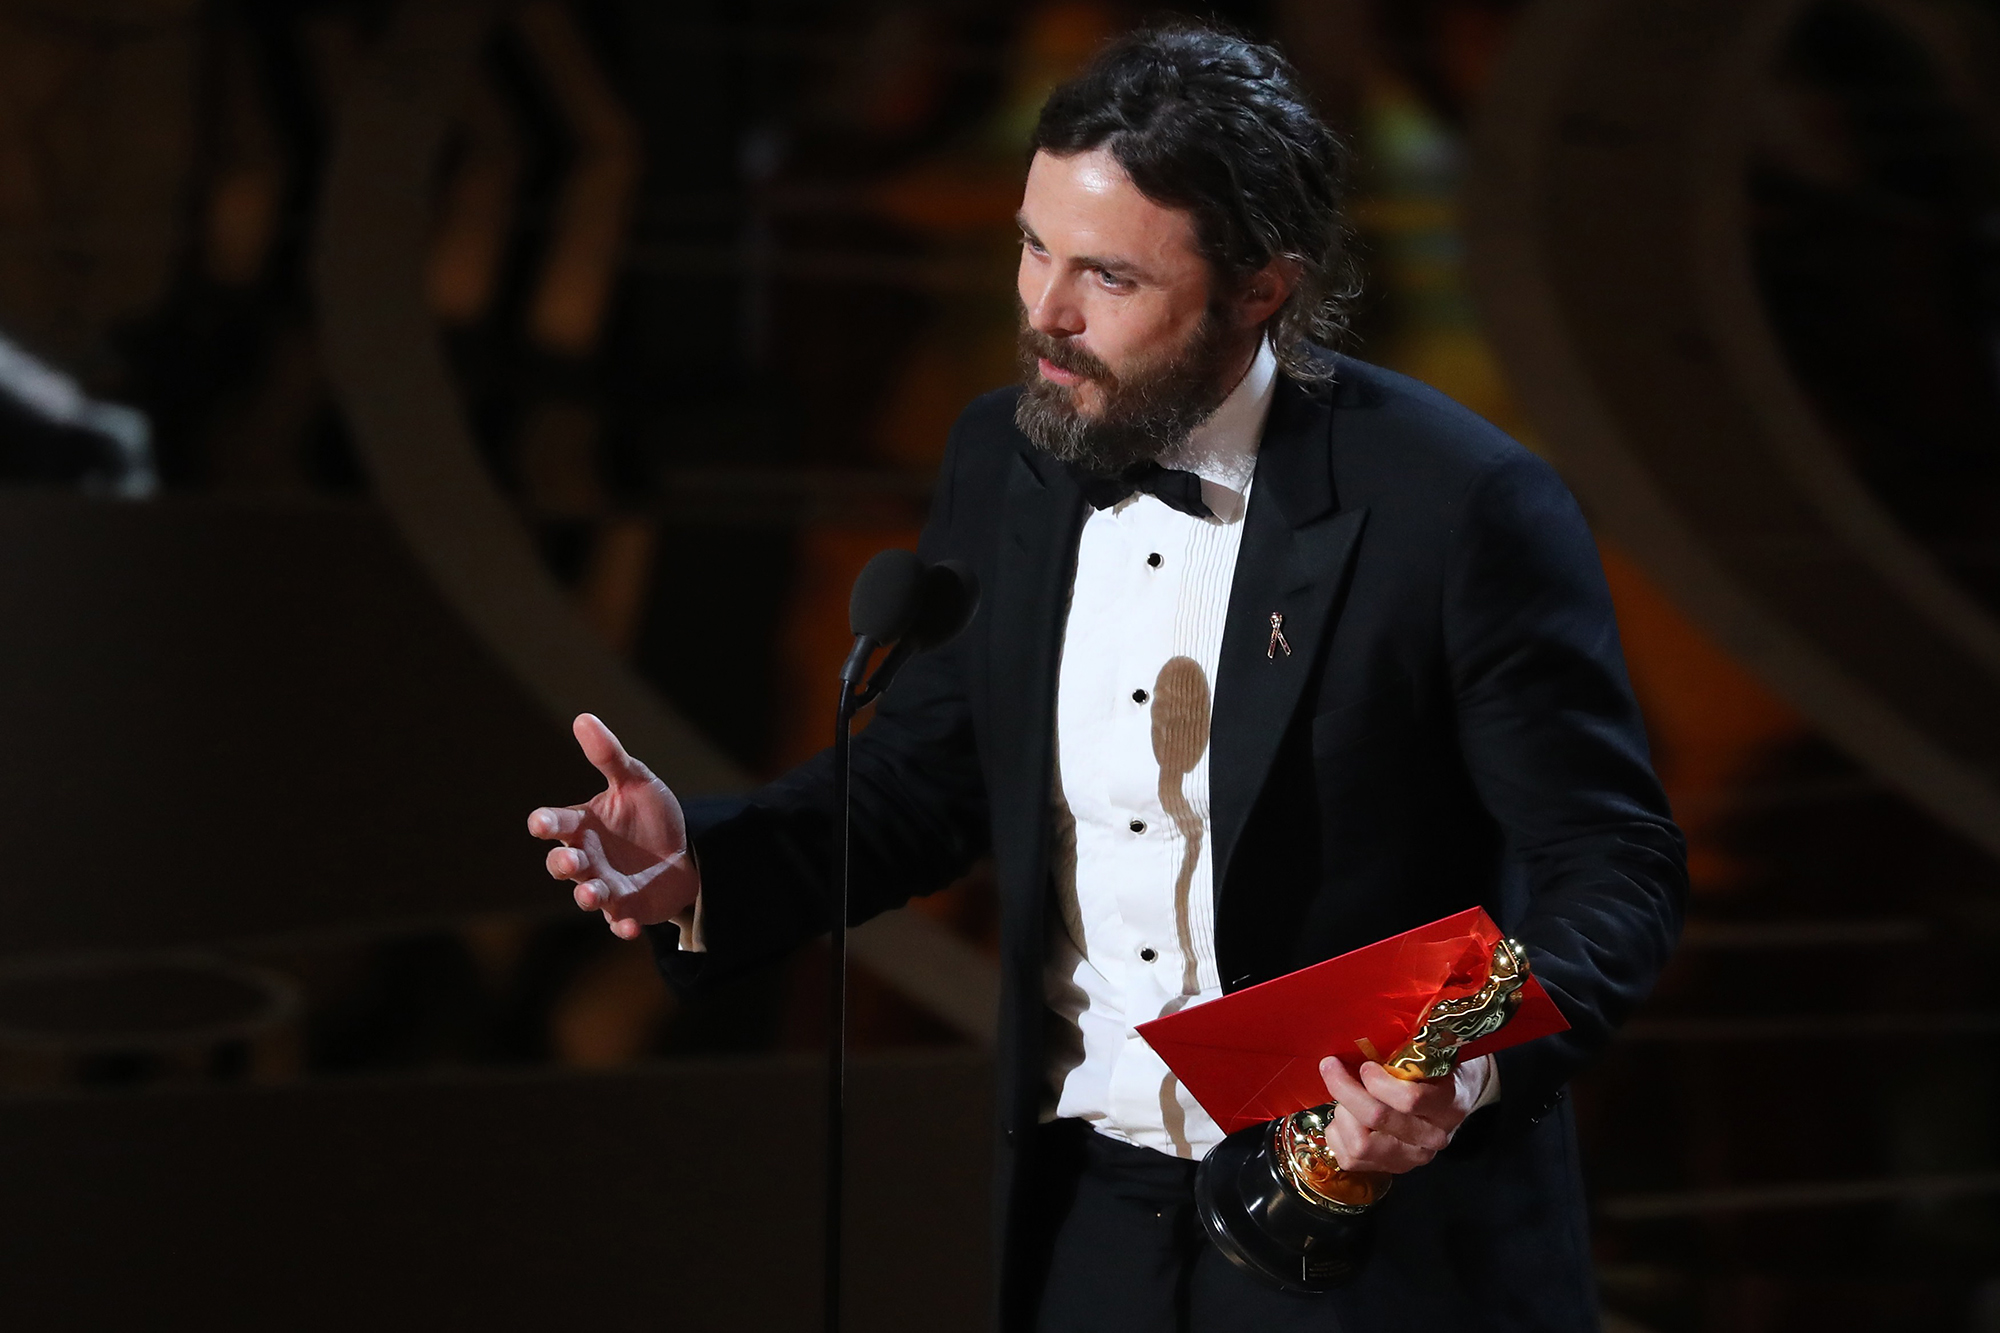 Casey Affleck speaks as he accepts the Oscar for Best Actor for Manchester by the Sea, on Feb. 27, 2017 in Hollywood, Calif.